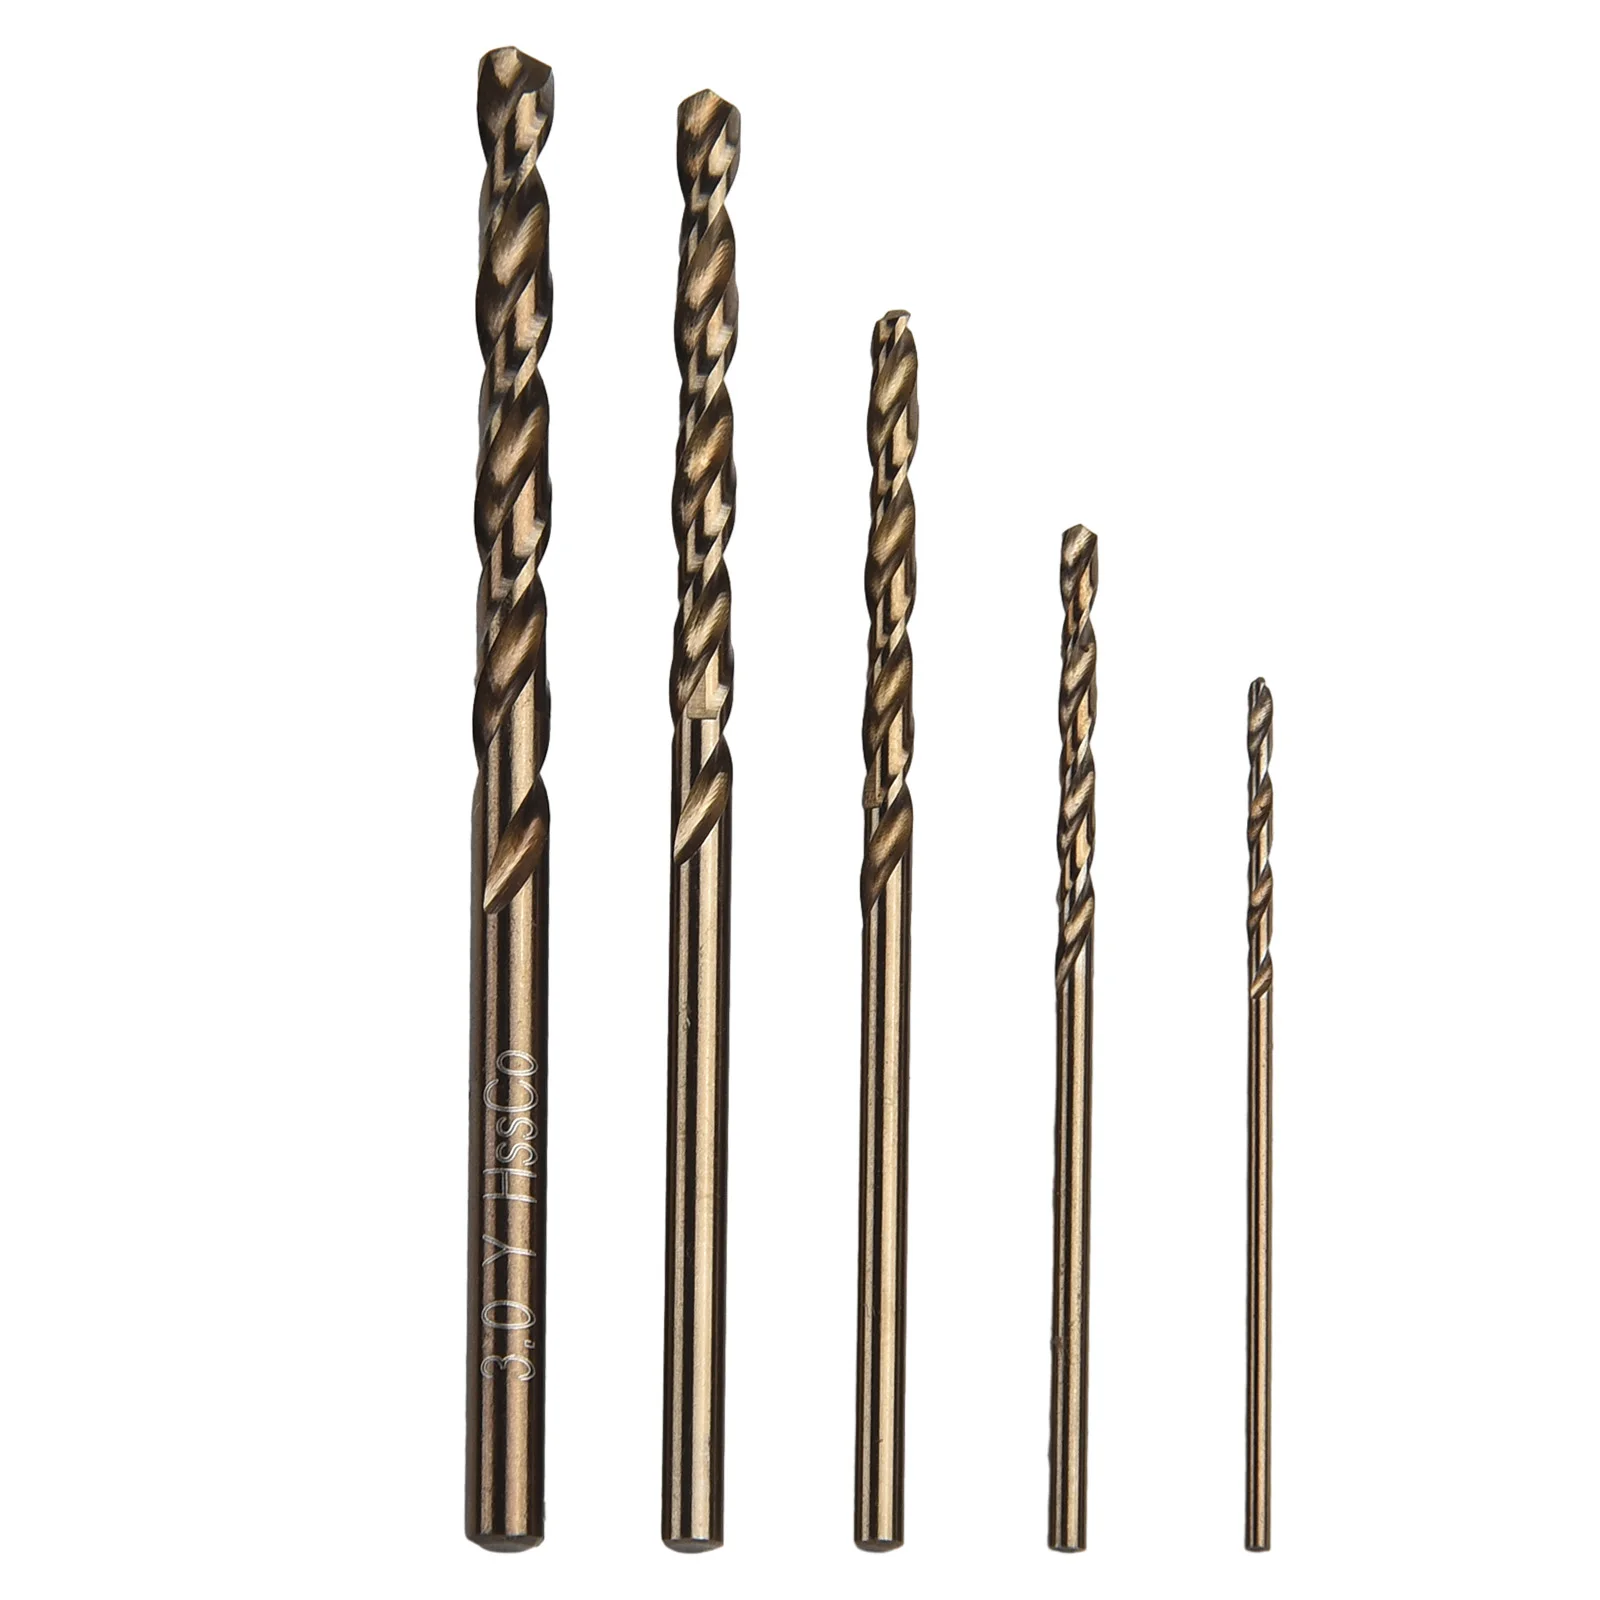 

5pcs Gold Auger Drill Bit HSS M35 Cobalt Drill Bit 1mm 1.5mm 2mm 2.5mm 3mm For Stainless Steel With 135 Degree Split Point Tip